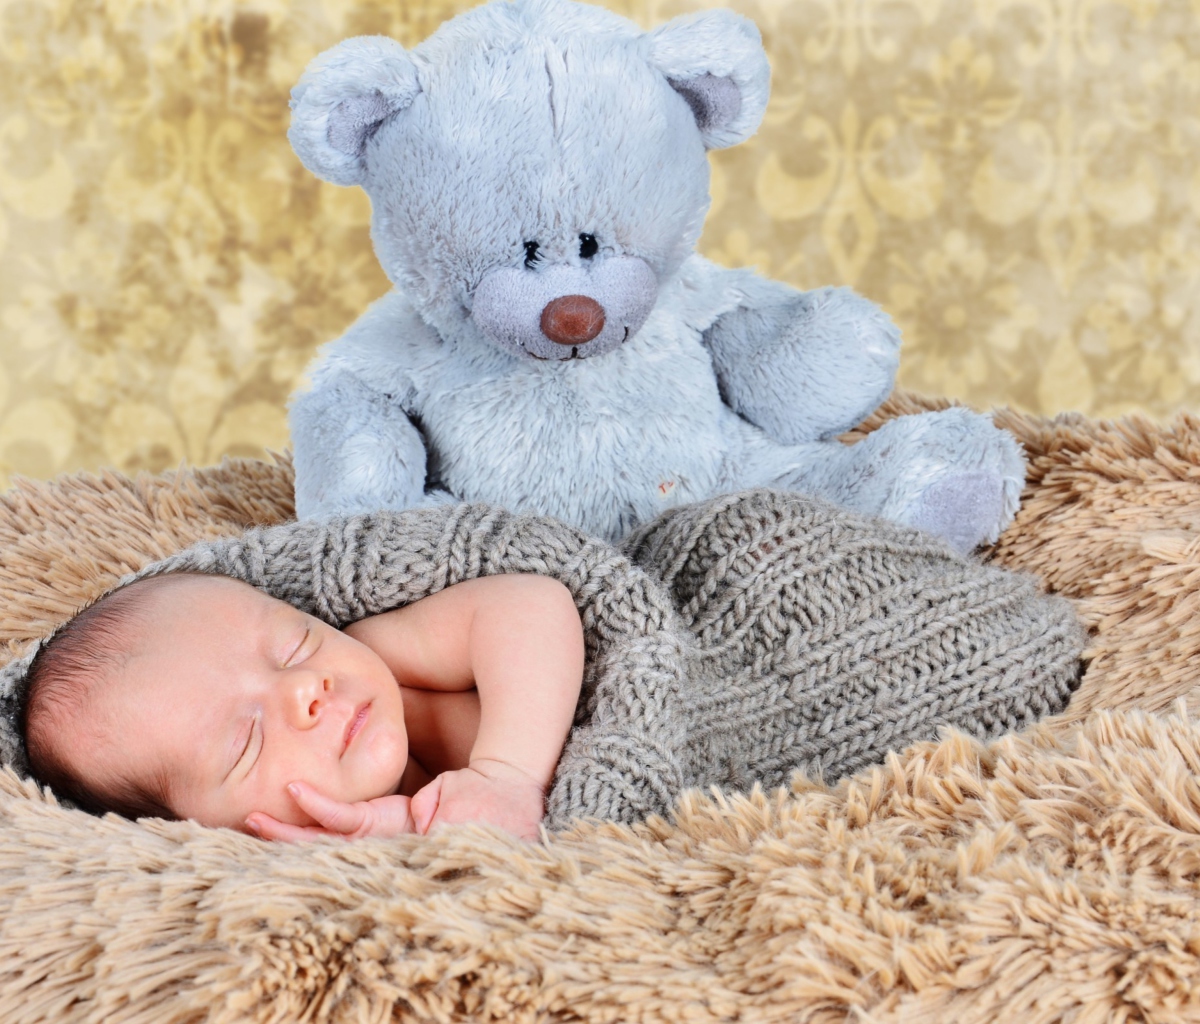 Baby And His Teddy wallpaper 1200x1024